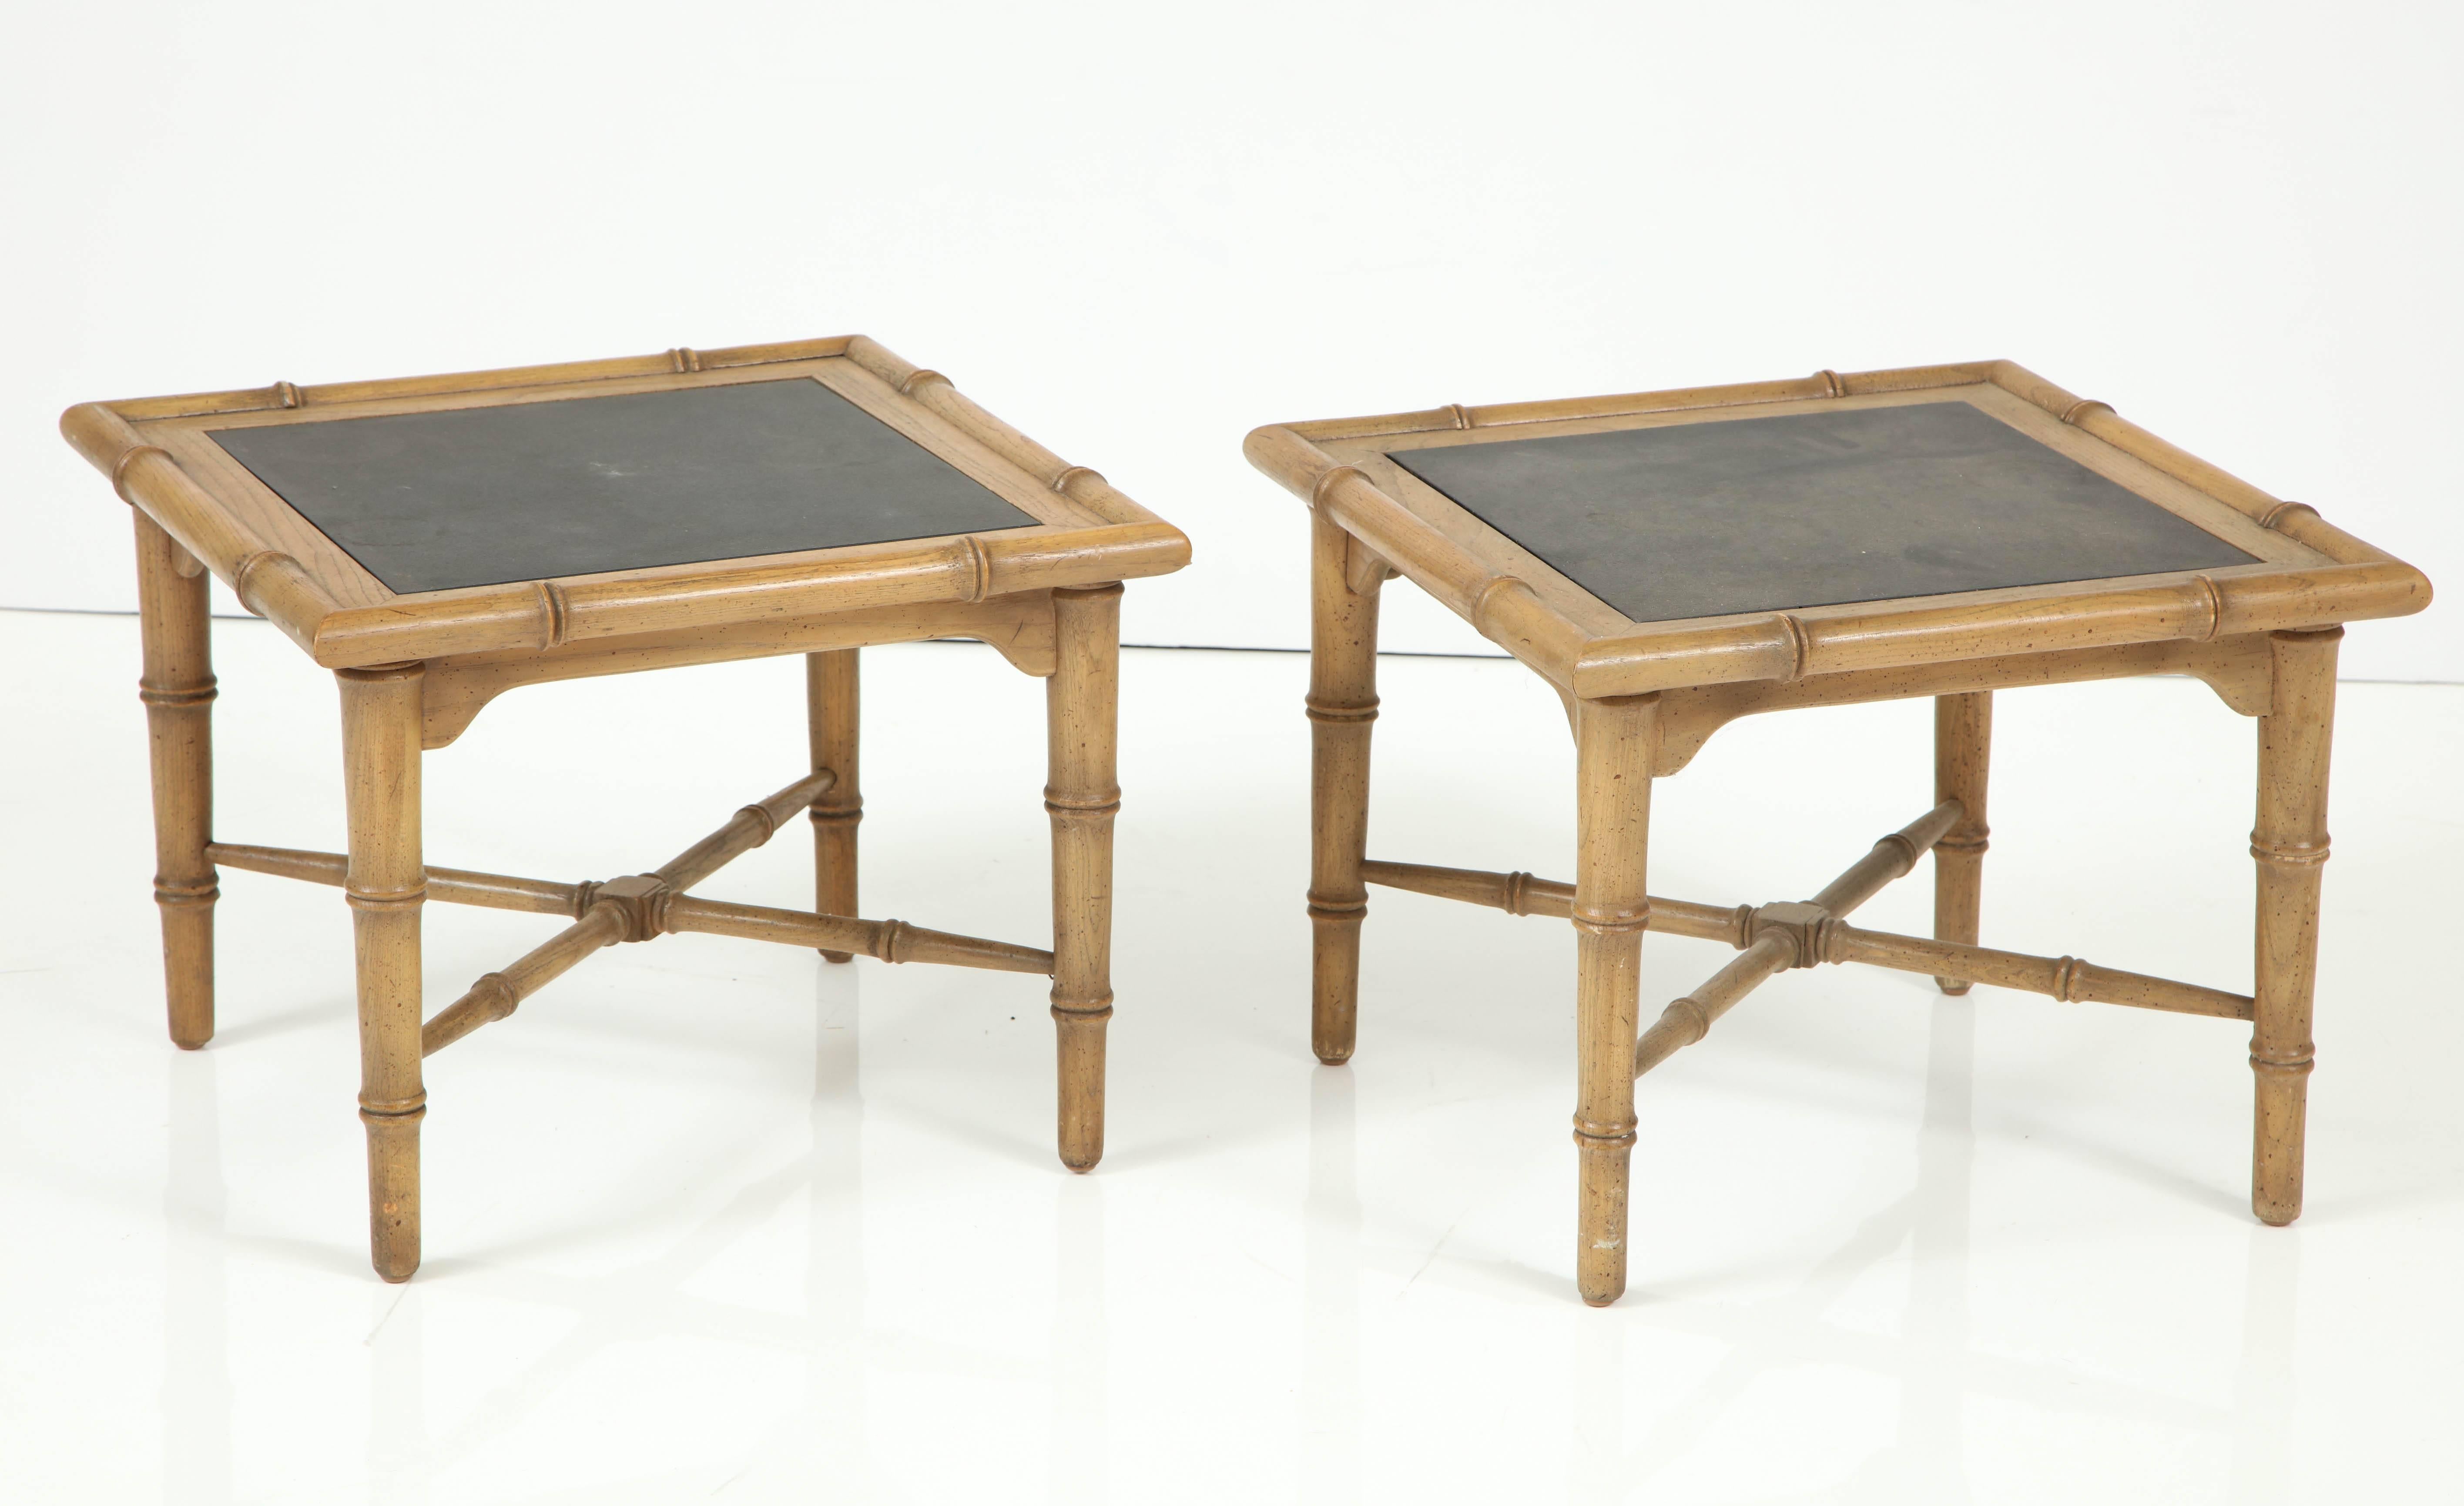 Faux bBamboo side tables with slate tops, USA, 1960s. Can be refinished in a different color on request.